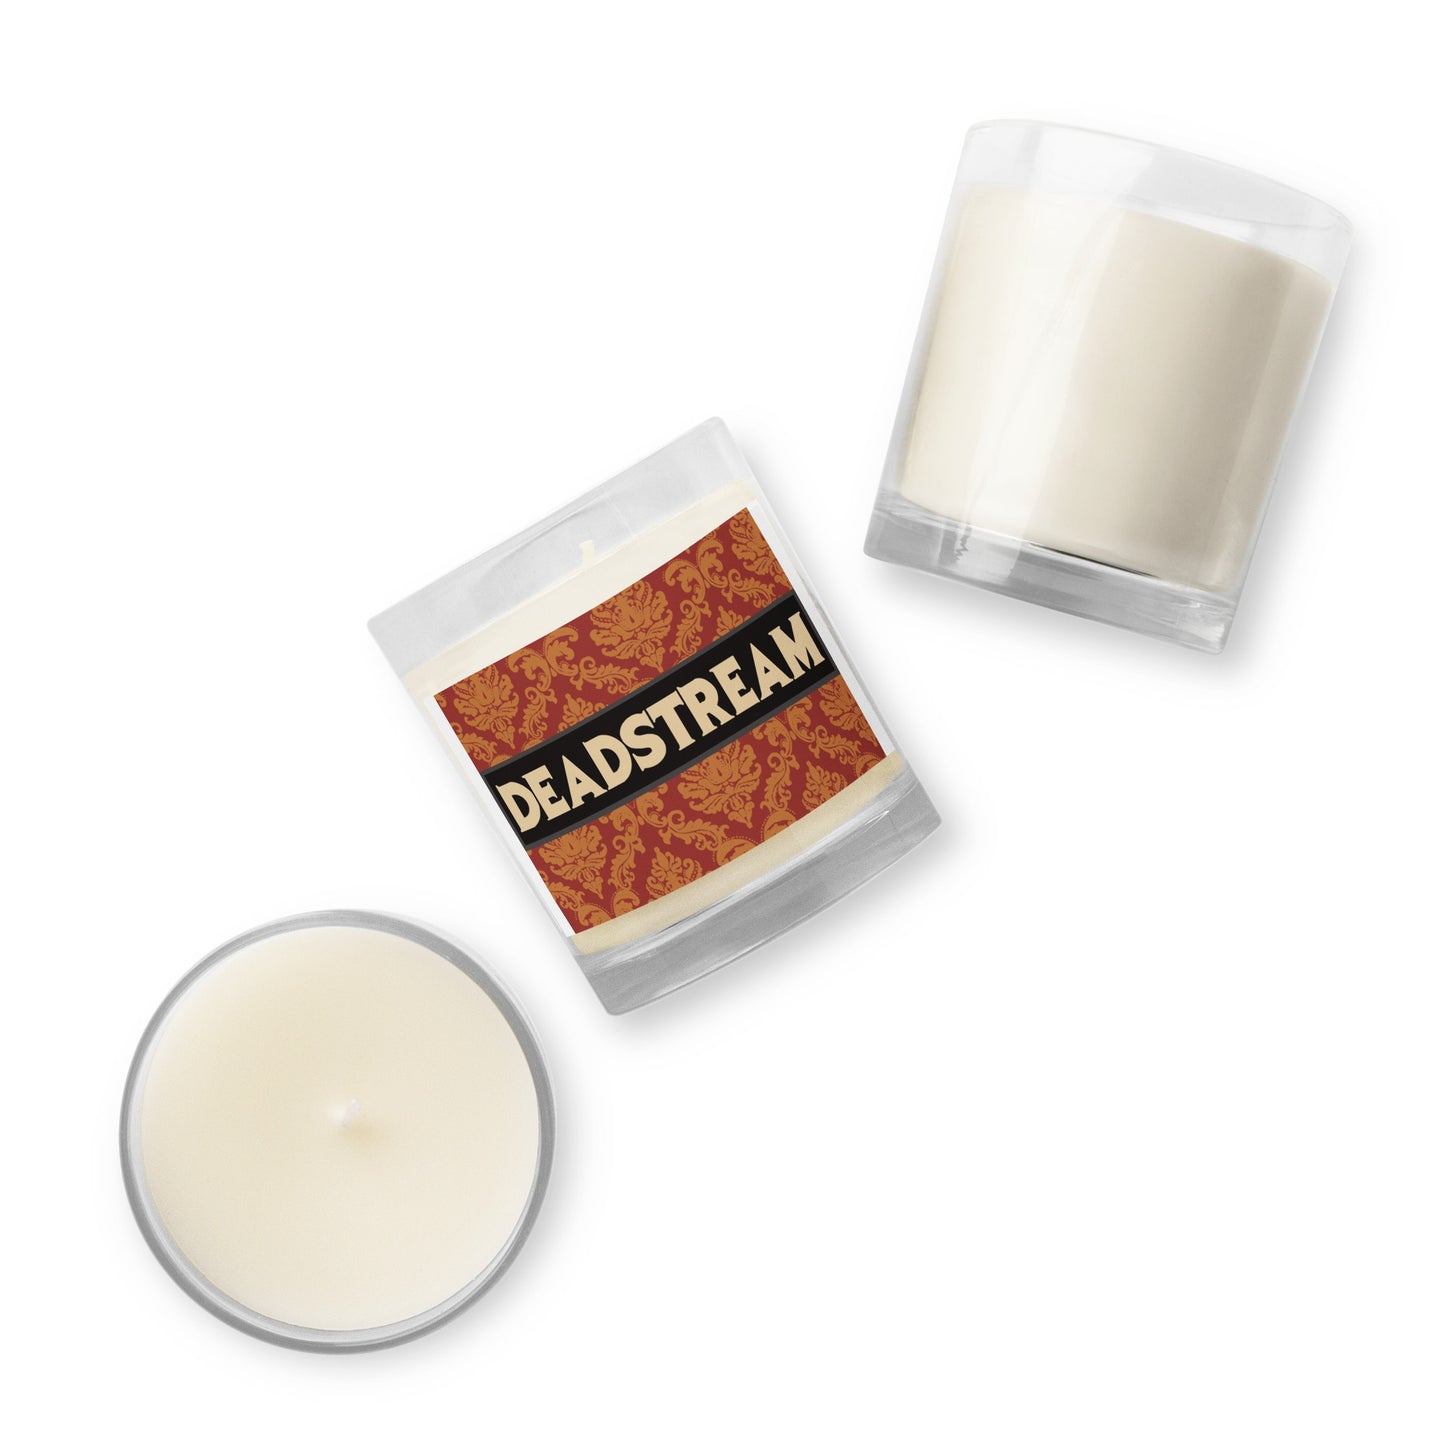 Deadstream Glass Jar Soy Wax Candle